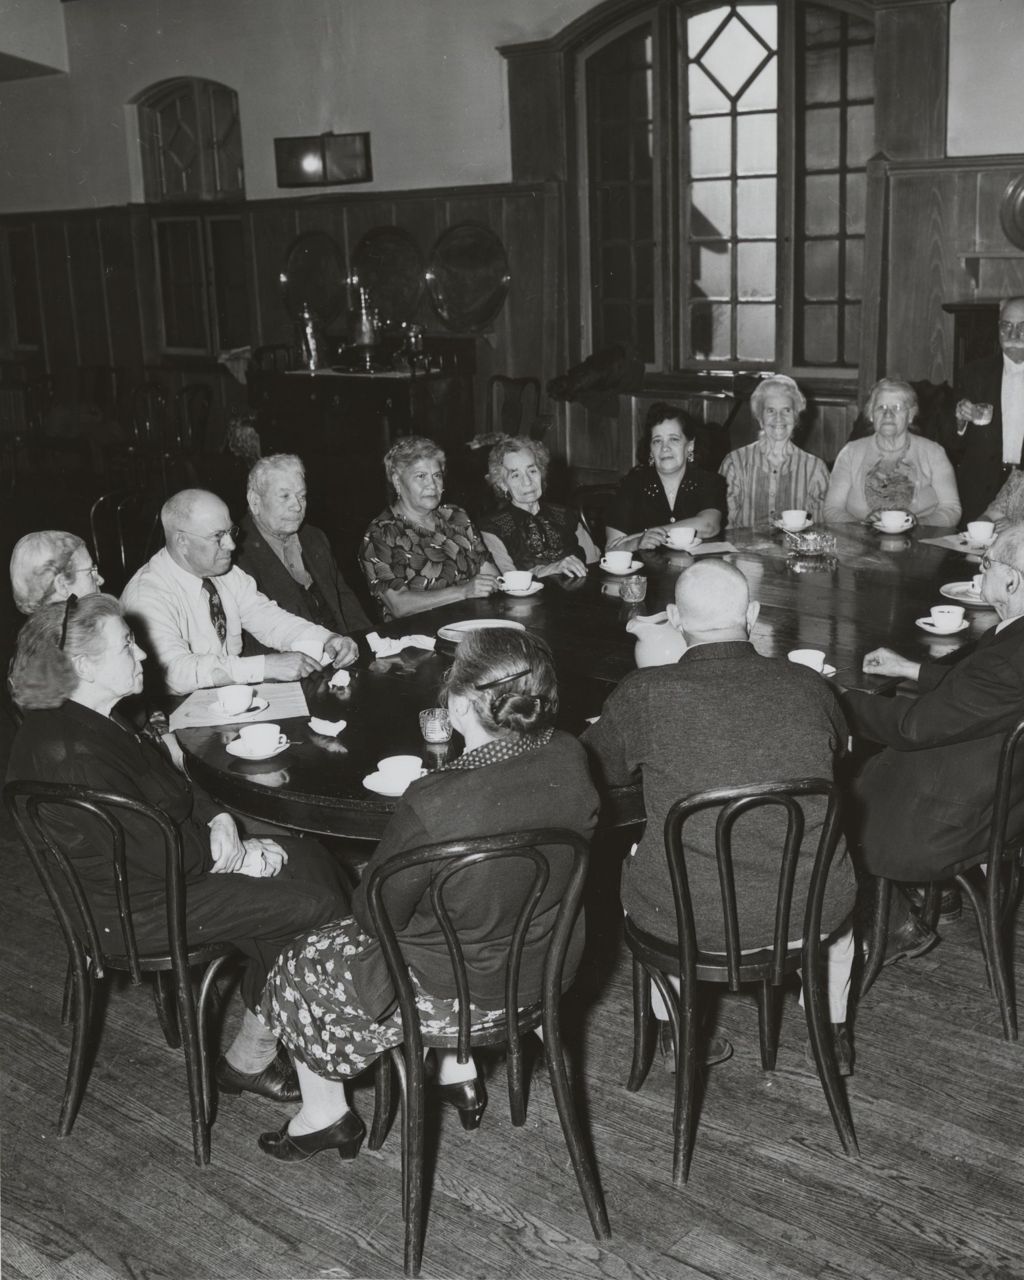 Miniature of Members of the Hull-House senior citizens club "Young Old Timers" having coffee or tea around a table in the Residents Dining Hall